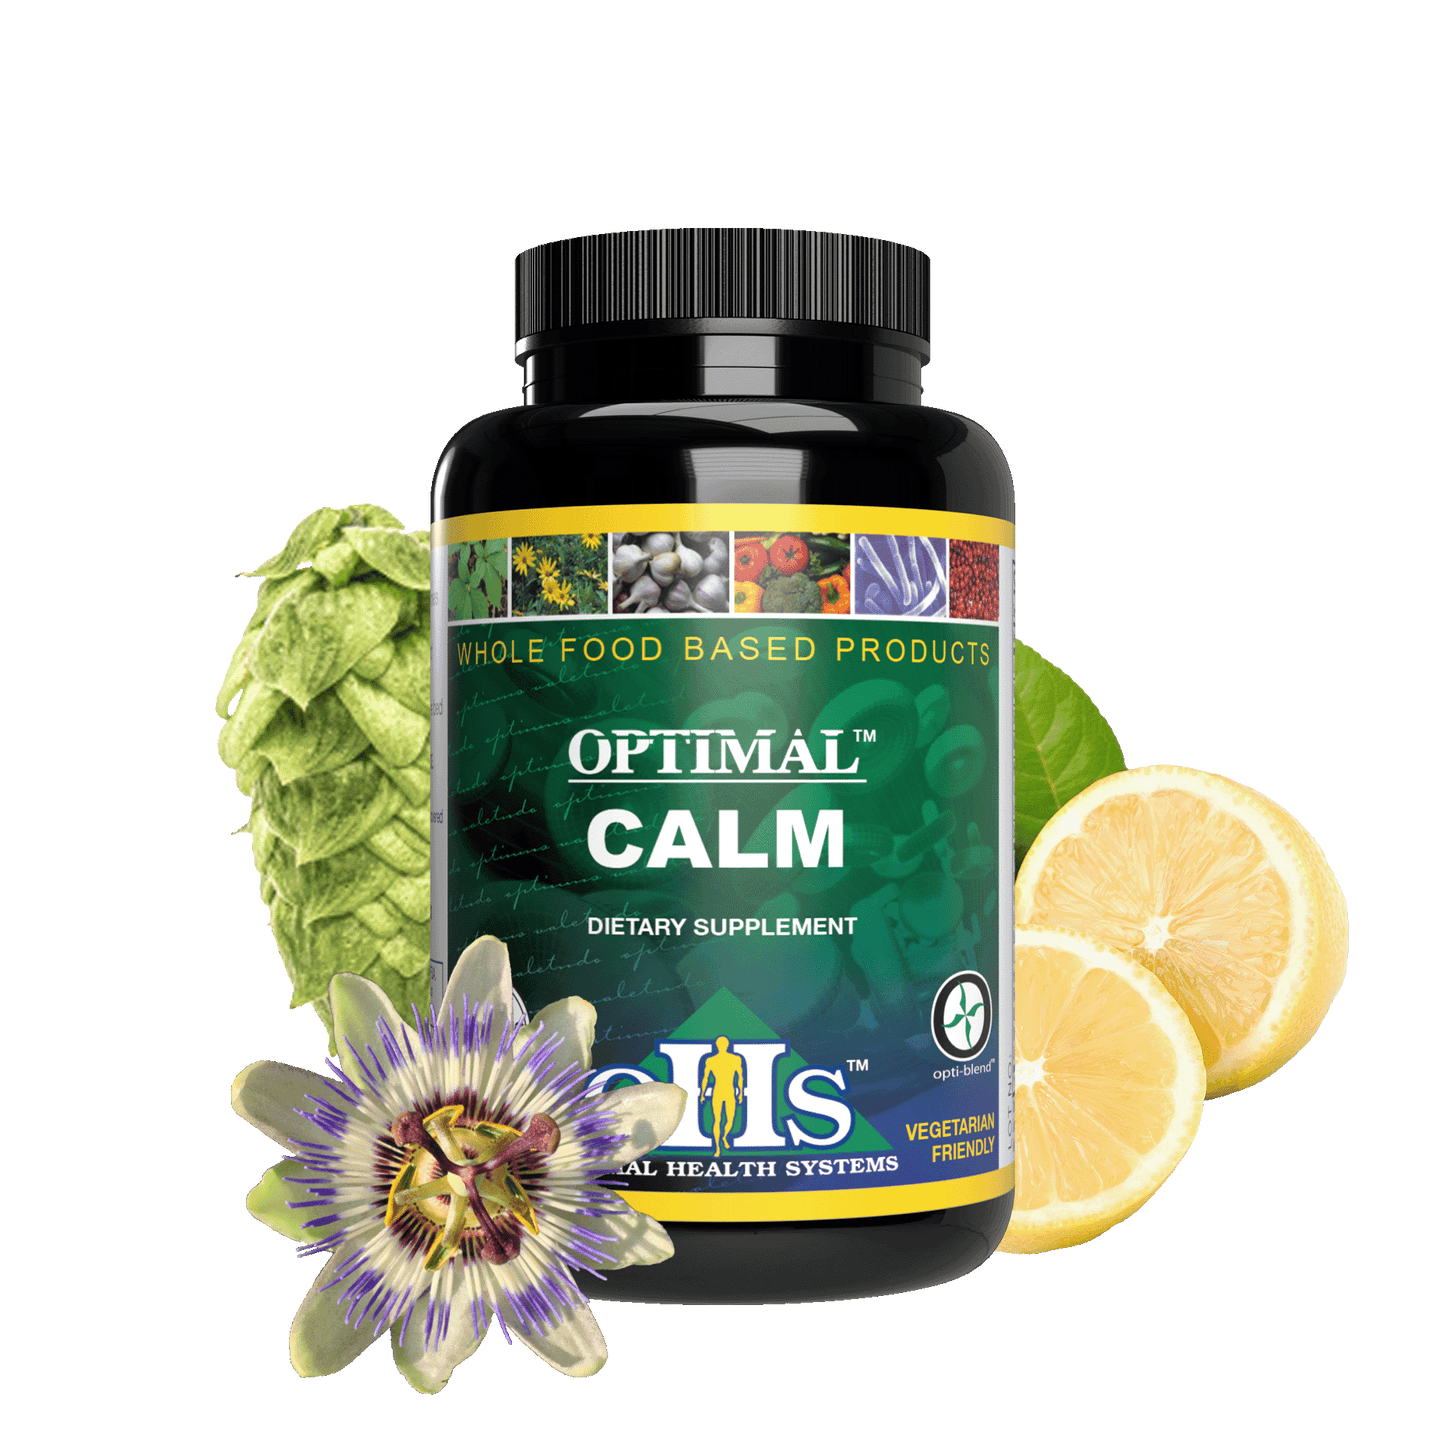 Image of a bottle of Optimal Calm with hops, sliced lemons, and passiflora flower.